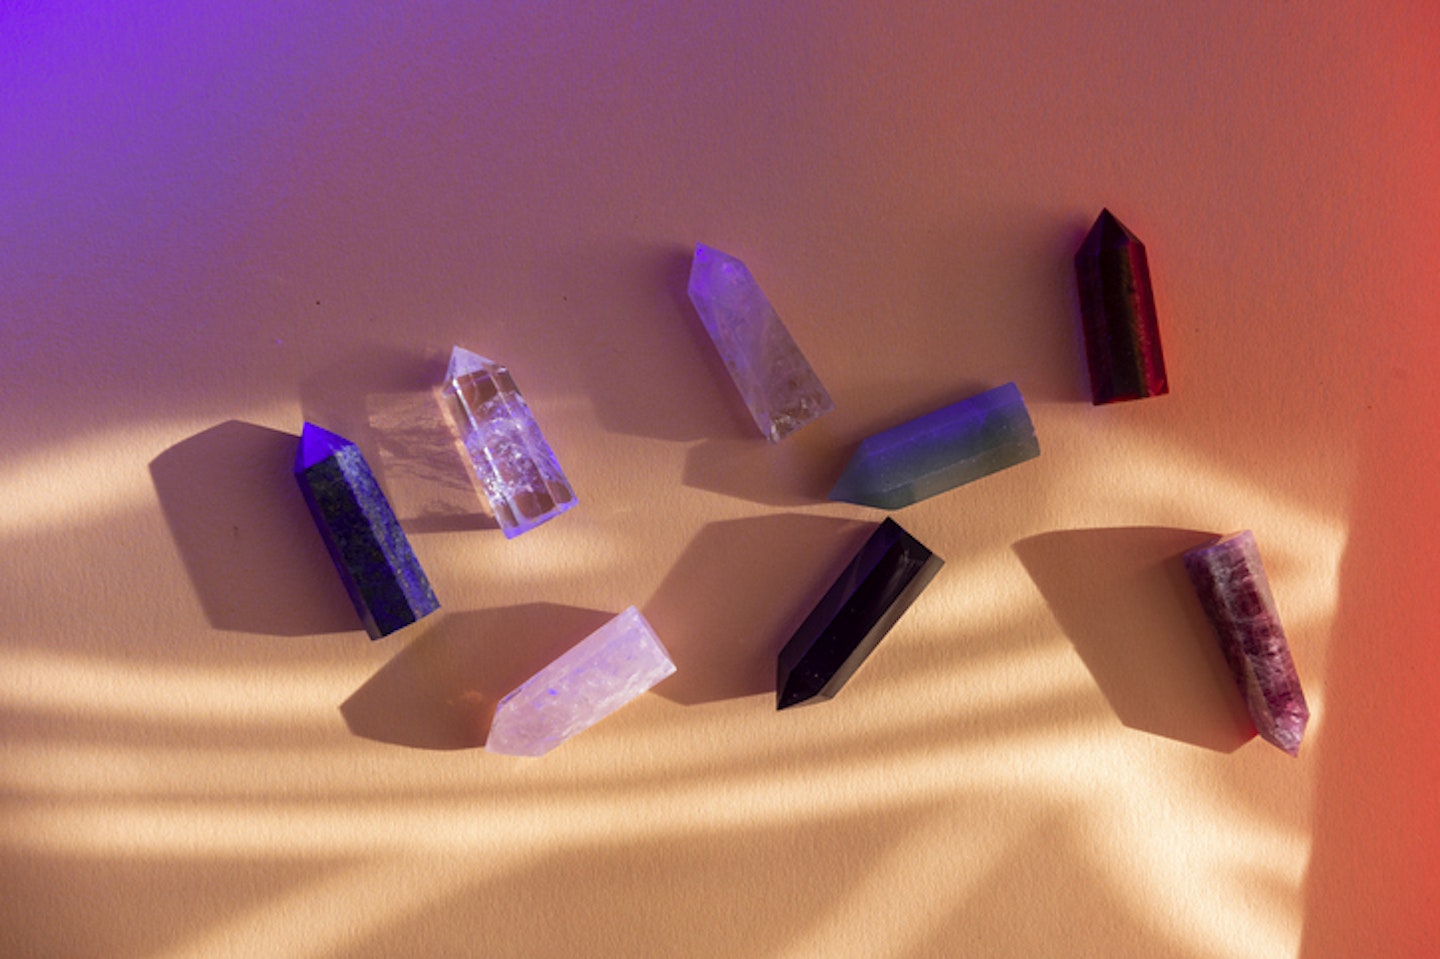 Healing chakra crystals with colorful light on beige background. Meditation, reiki and spiritual healing concept